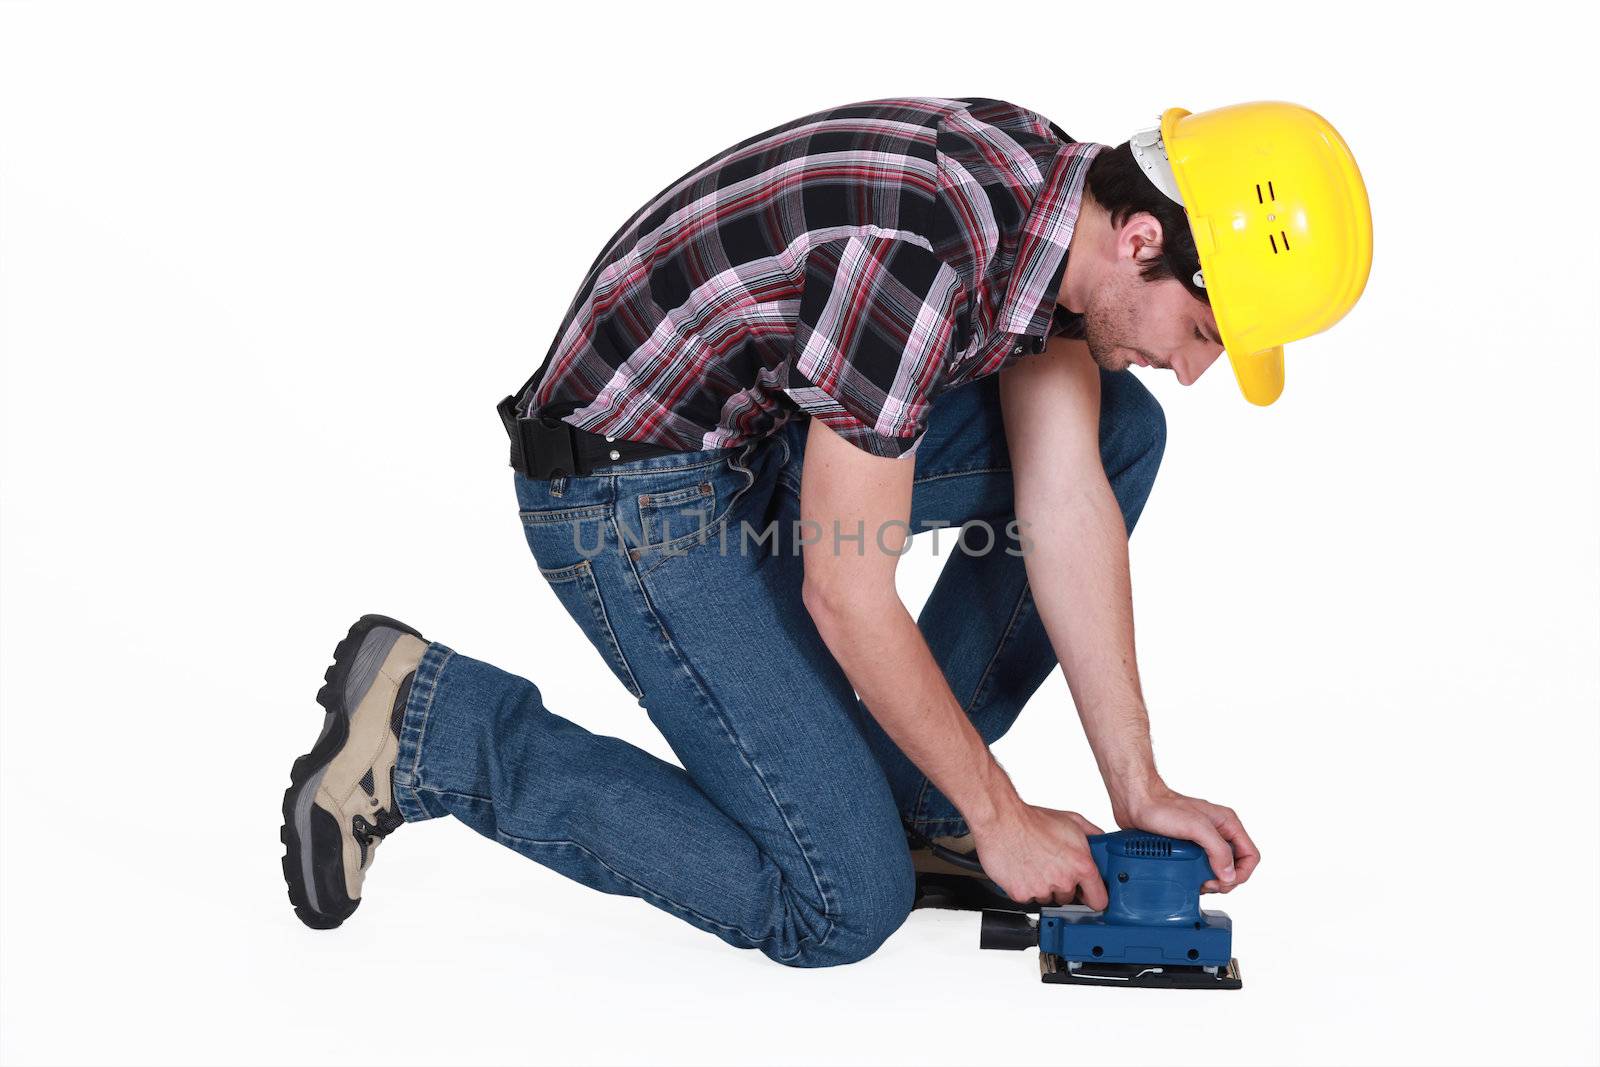 Workman using an electric sander by phovoir